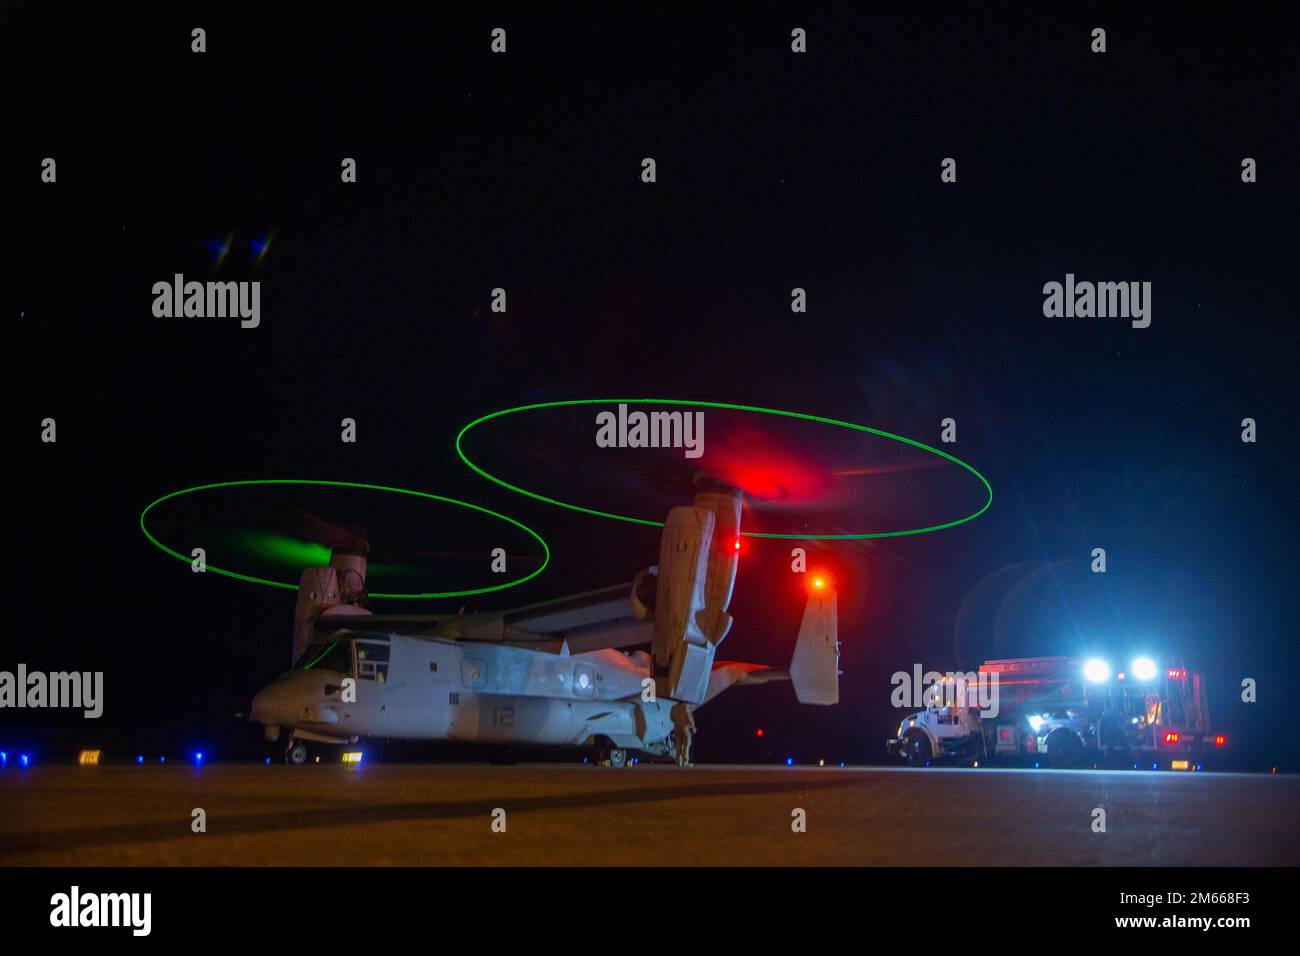 A U.S. Marine Corps MV-22B Osprey with Marine Aviation Weapons and Tactics Squadron One (MAWTS-1), is prepared for takeoff after a refuel during Weapons and Tactics Instructor Course (WTI) 2-22, near Yuma, Arizona, April 6, 2022. WTI is a seven-week training event hosted by MAWTS-1, providing standardized advanced tactical training and certification of unit instructor qualifications to support Marine aviation training and readiness, and assists in developing and employing aviation weapons and tactics. Stock Photo